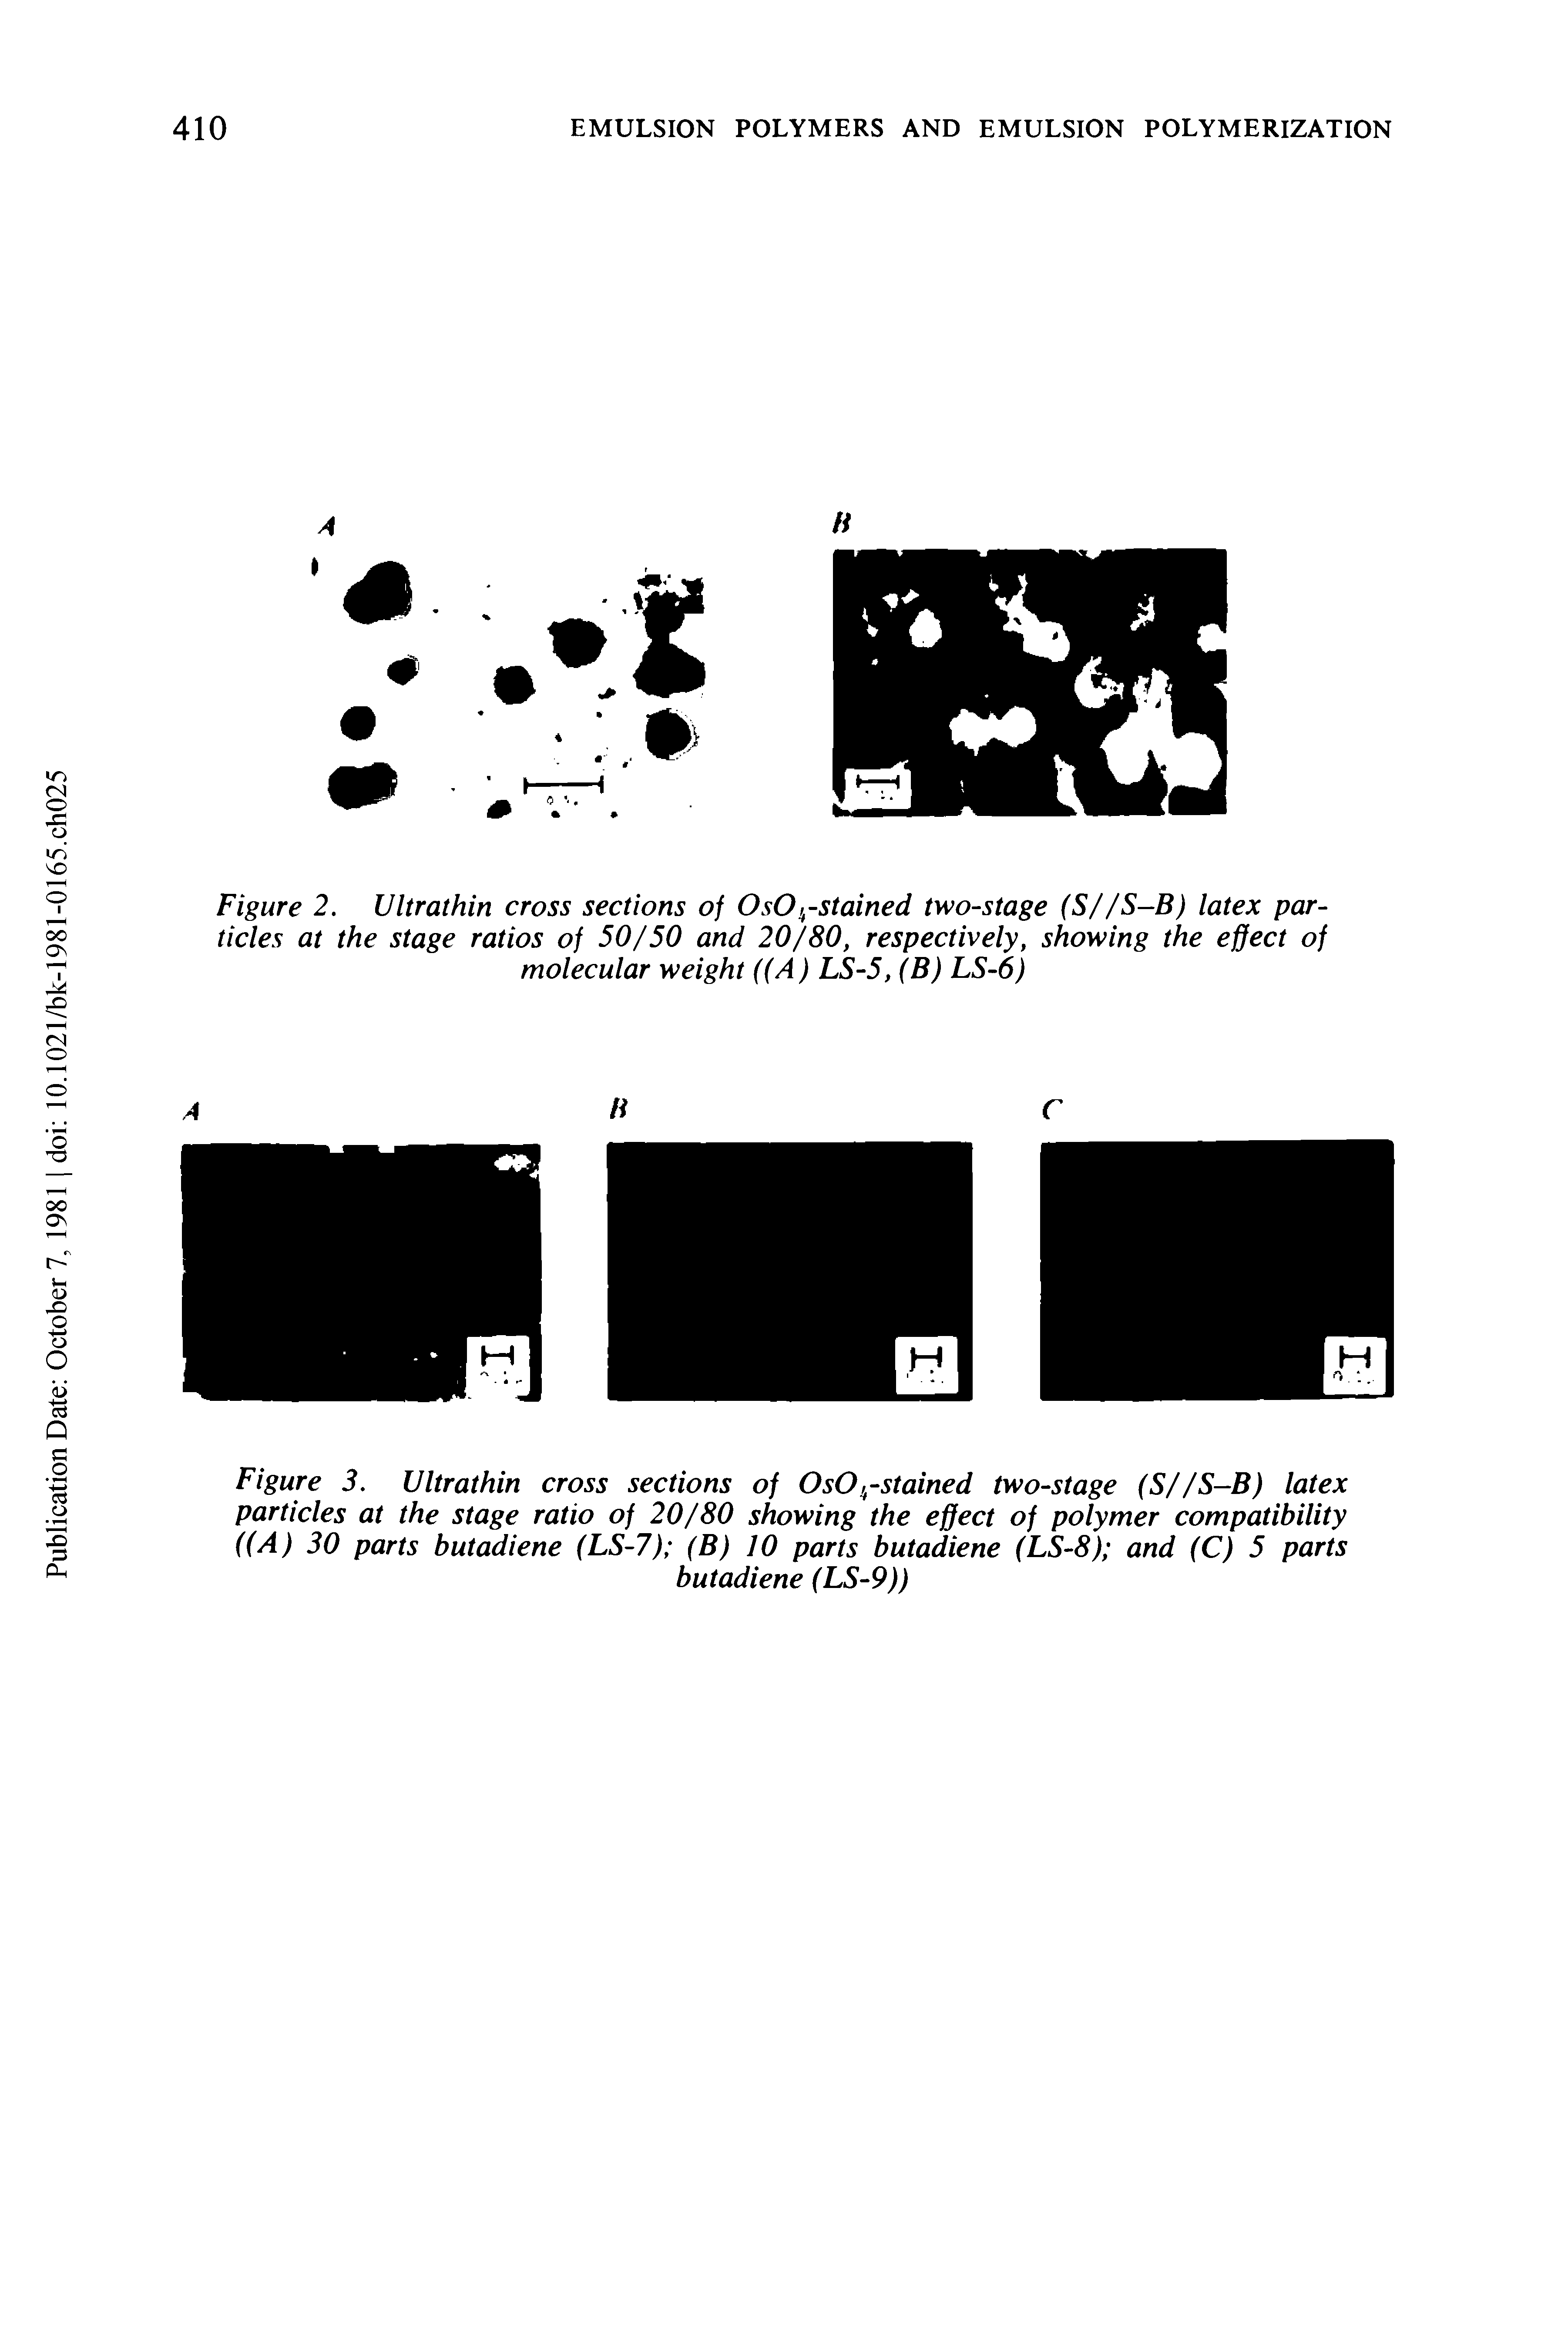 Figure 3. Ultrathin cross sections of OsO, -stained two-stage (S//S-B) latex particles at the stage ratio of 20/80 showing the effect of polymer compatibility ((A) 30 parts butadiene (LS-7) (B) JO parts butadiene (LS-8) and (C) 5 parts...